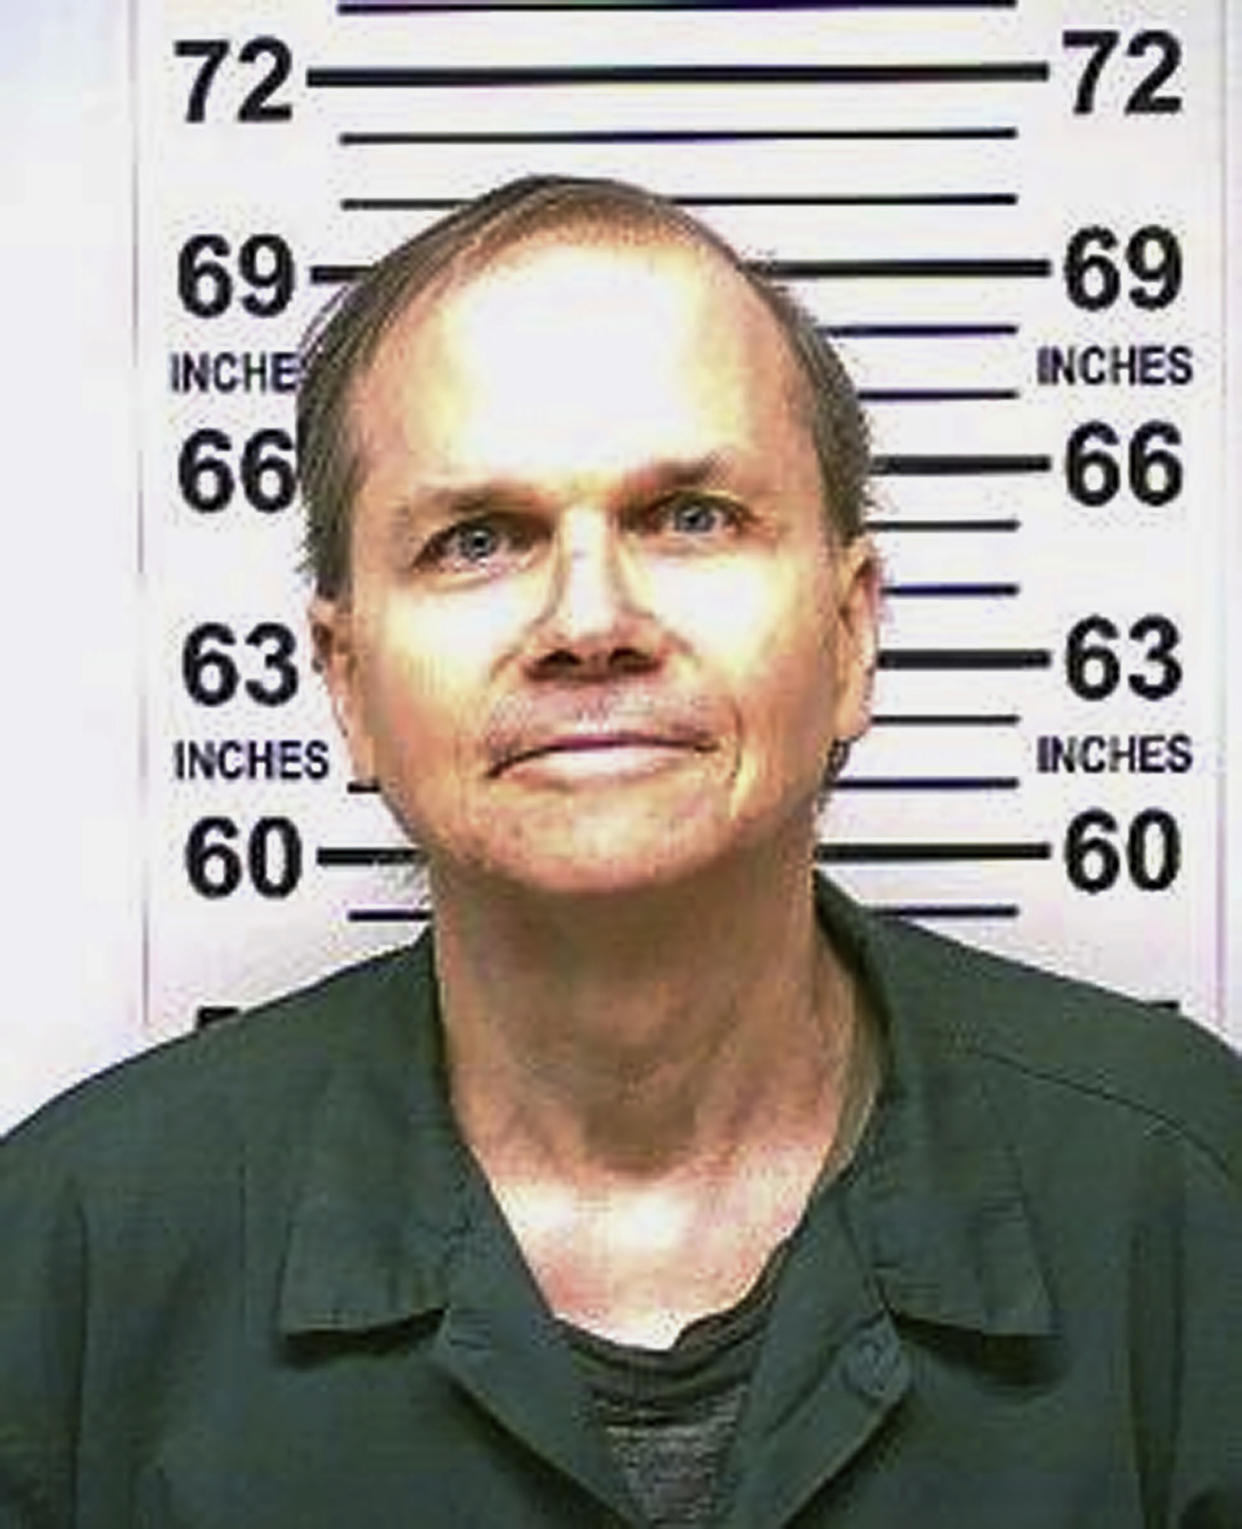 FILE - This photo provided by the New York State Department of Corrections shows Mark David Chapman, the man who shot and killed John Lennon outside his Manhattan apartment building in 1980, Jan. 31, 2018. Chapman told a parole board that he knew it was wrong to kill the beloved former Beatle, but that he was seeking fame and had “evil in his heart." He made the comments in August 2022 to a board that denied him parole for an 12th time, citing his “selfish disregard for human life of global consequence.” (New York State Department of Corrections via AP, File)